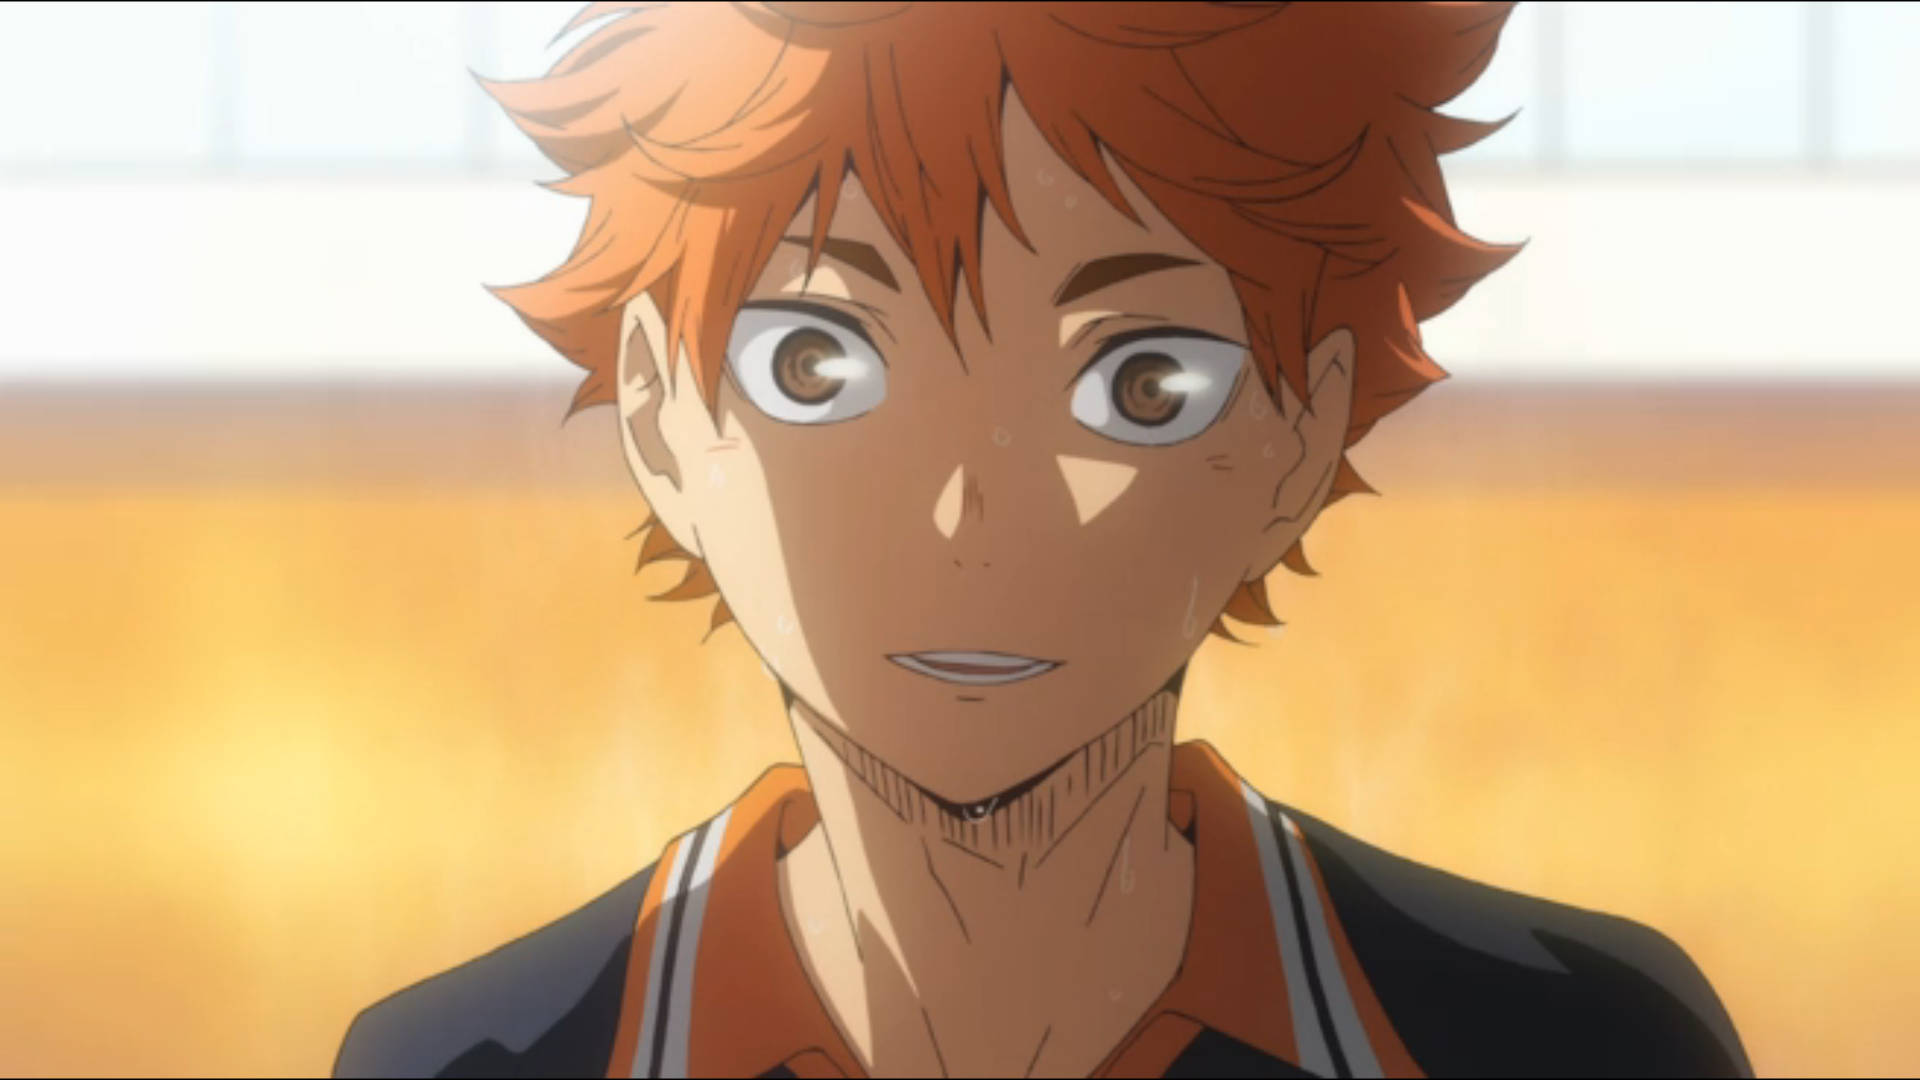 “go Beyond Your Limits To Fulfill Your Dreams!” – Hinata Shouyou Background